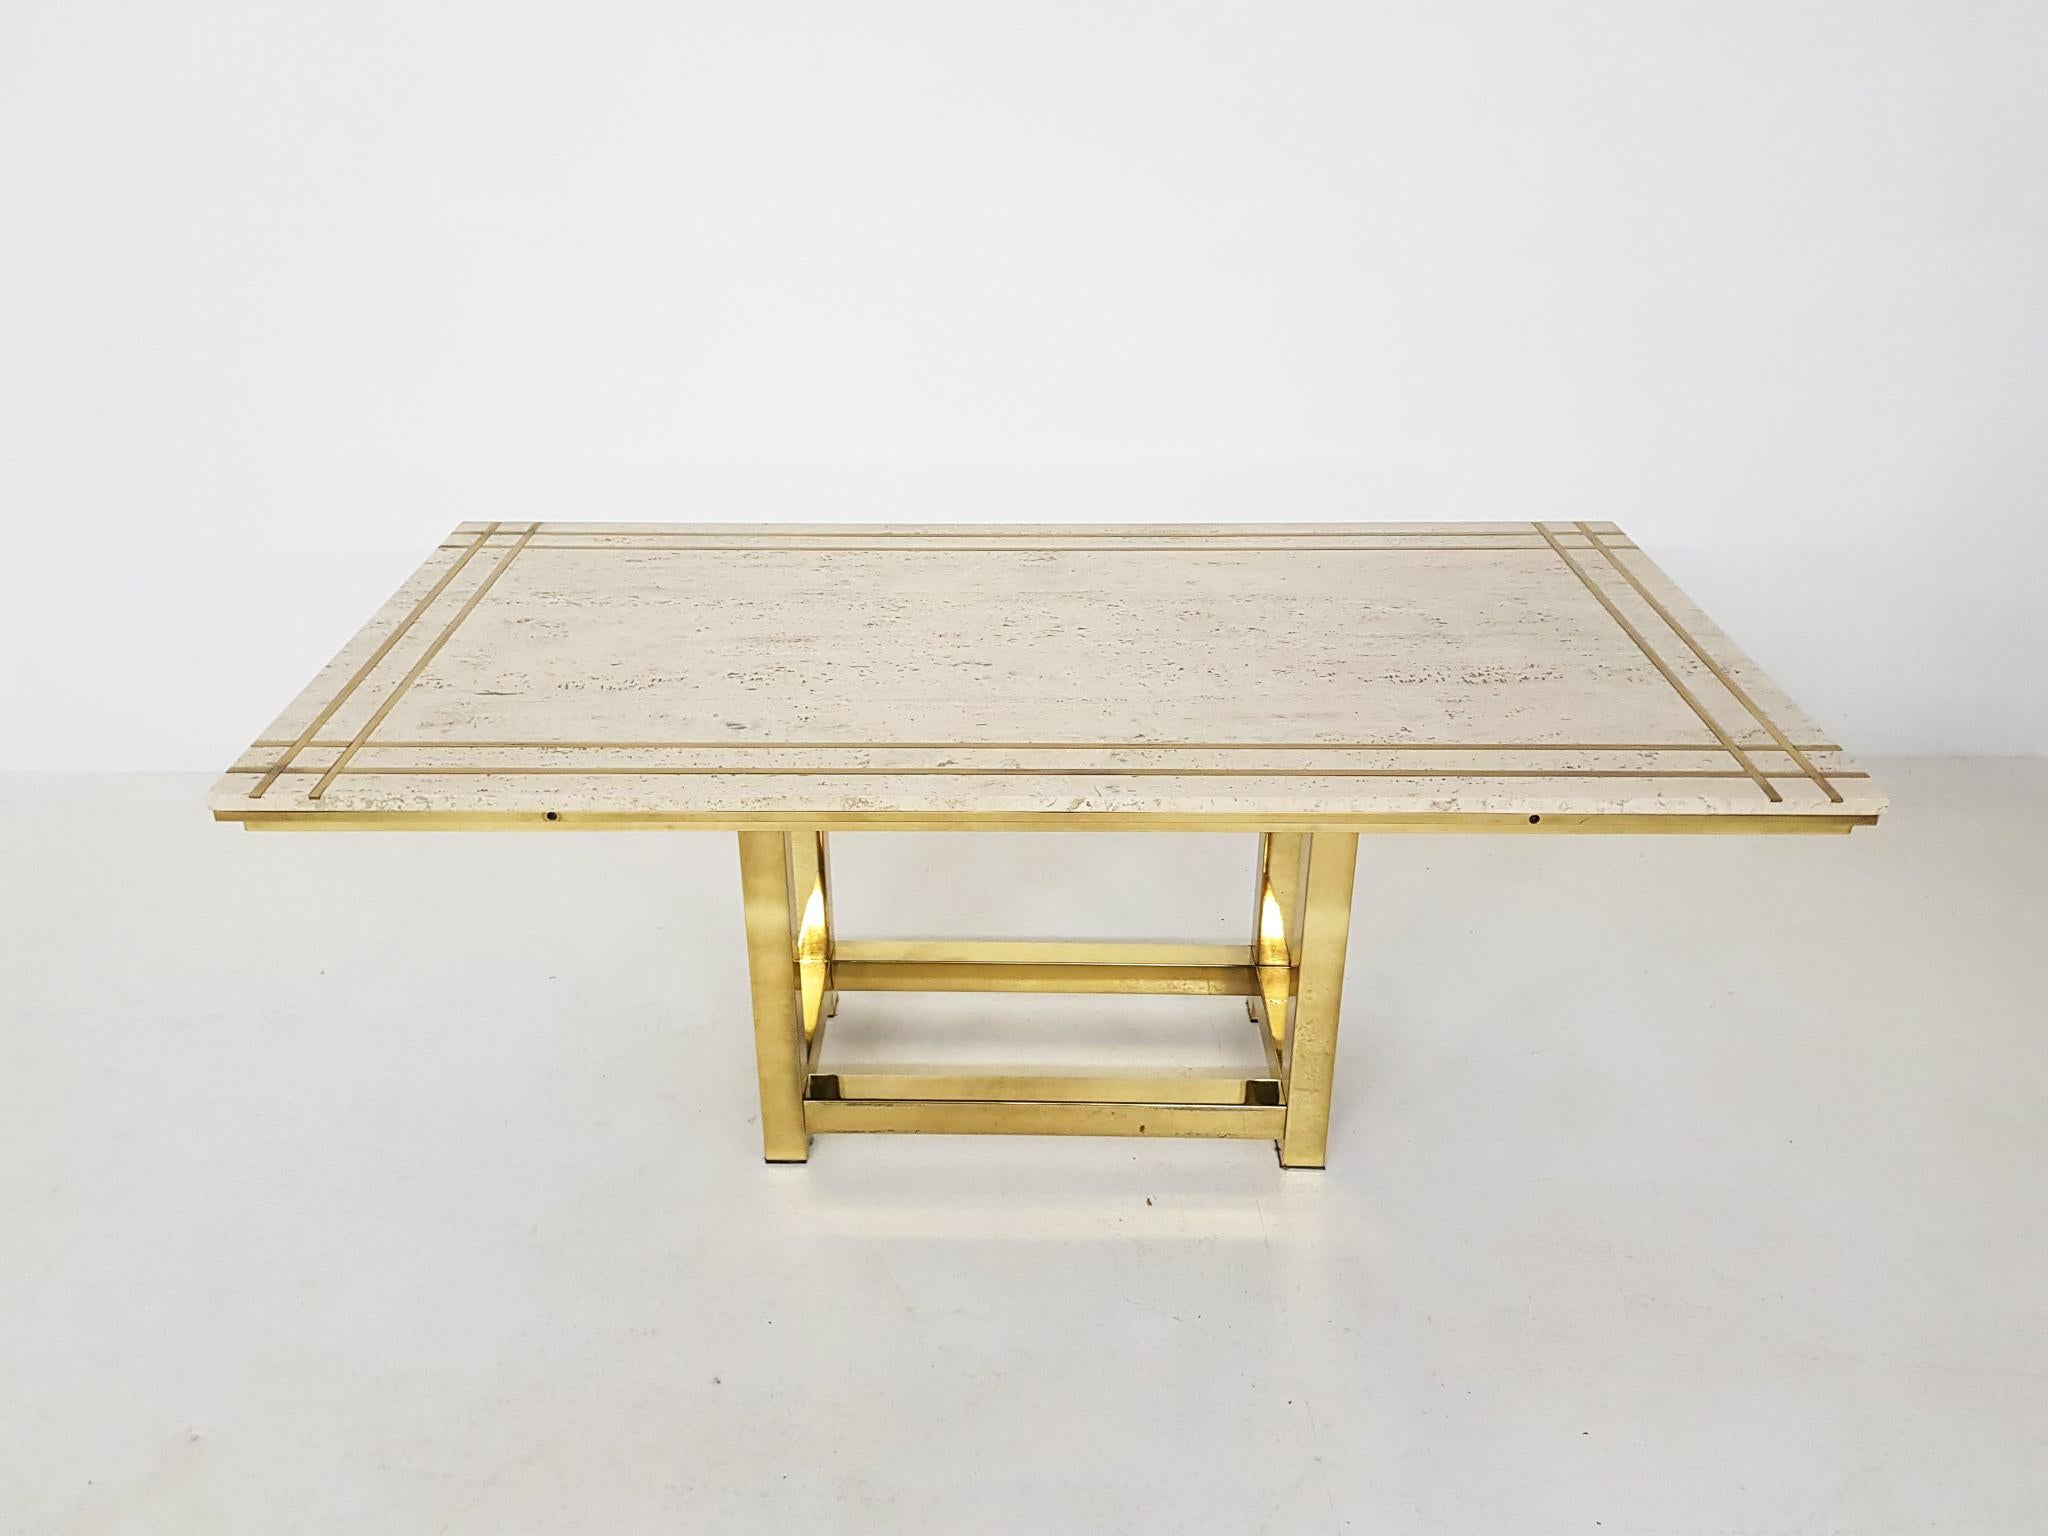 Alain Delon Travertine, Brass and Gold Dining Set, France, 1980s For Sale 3